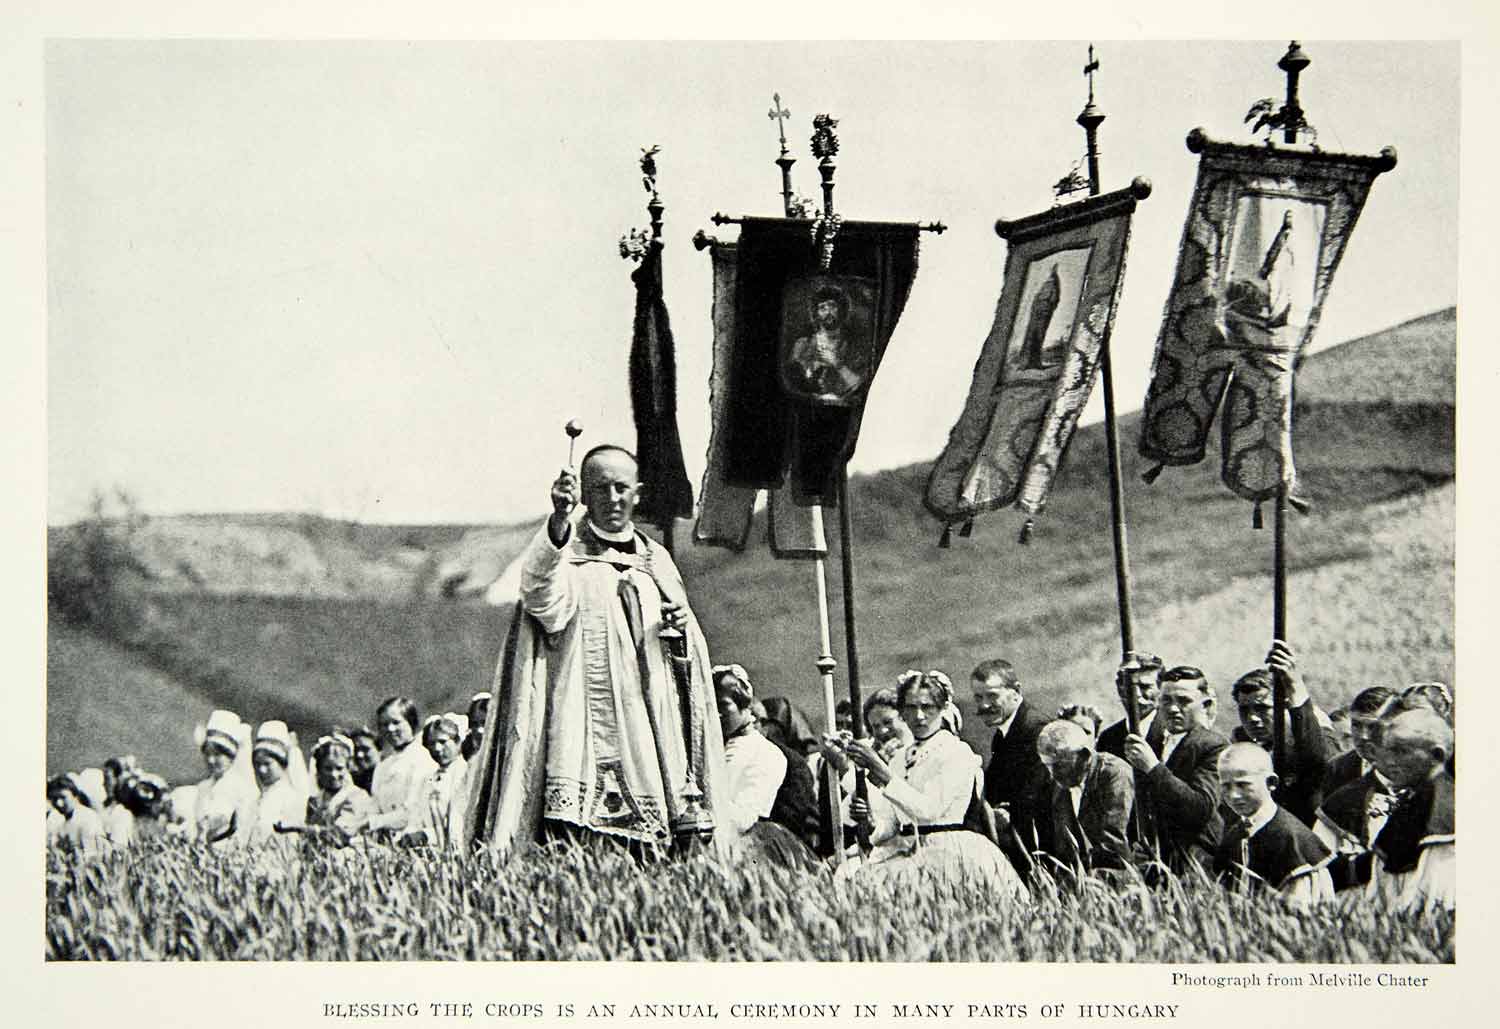 1929 Print Hungary Priest Crops Blessing Farming Agriculture Religion Image NGM9